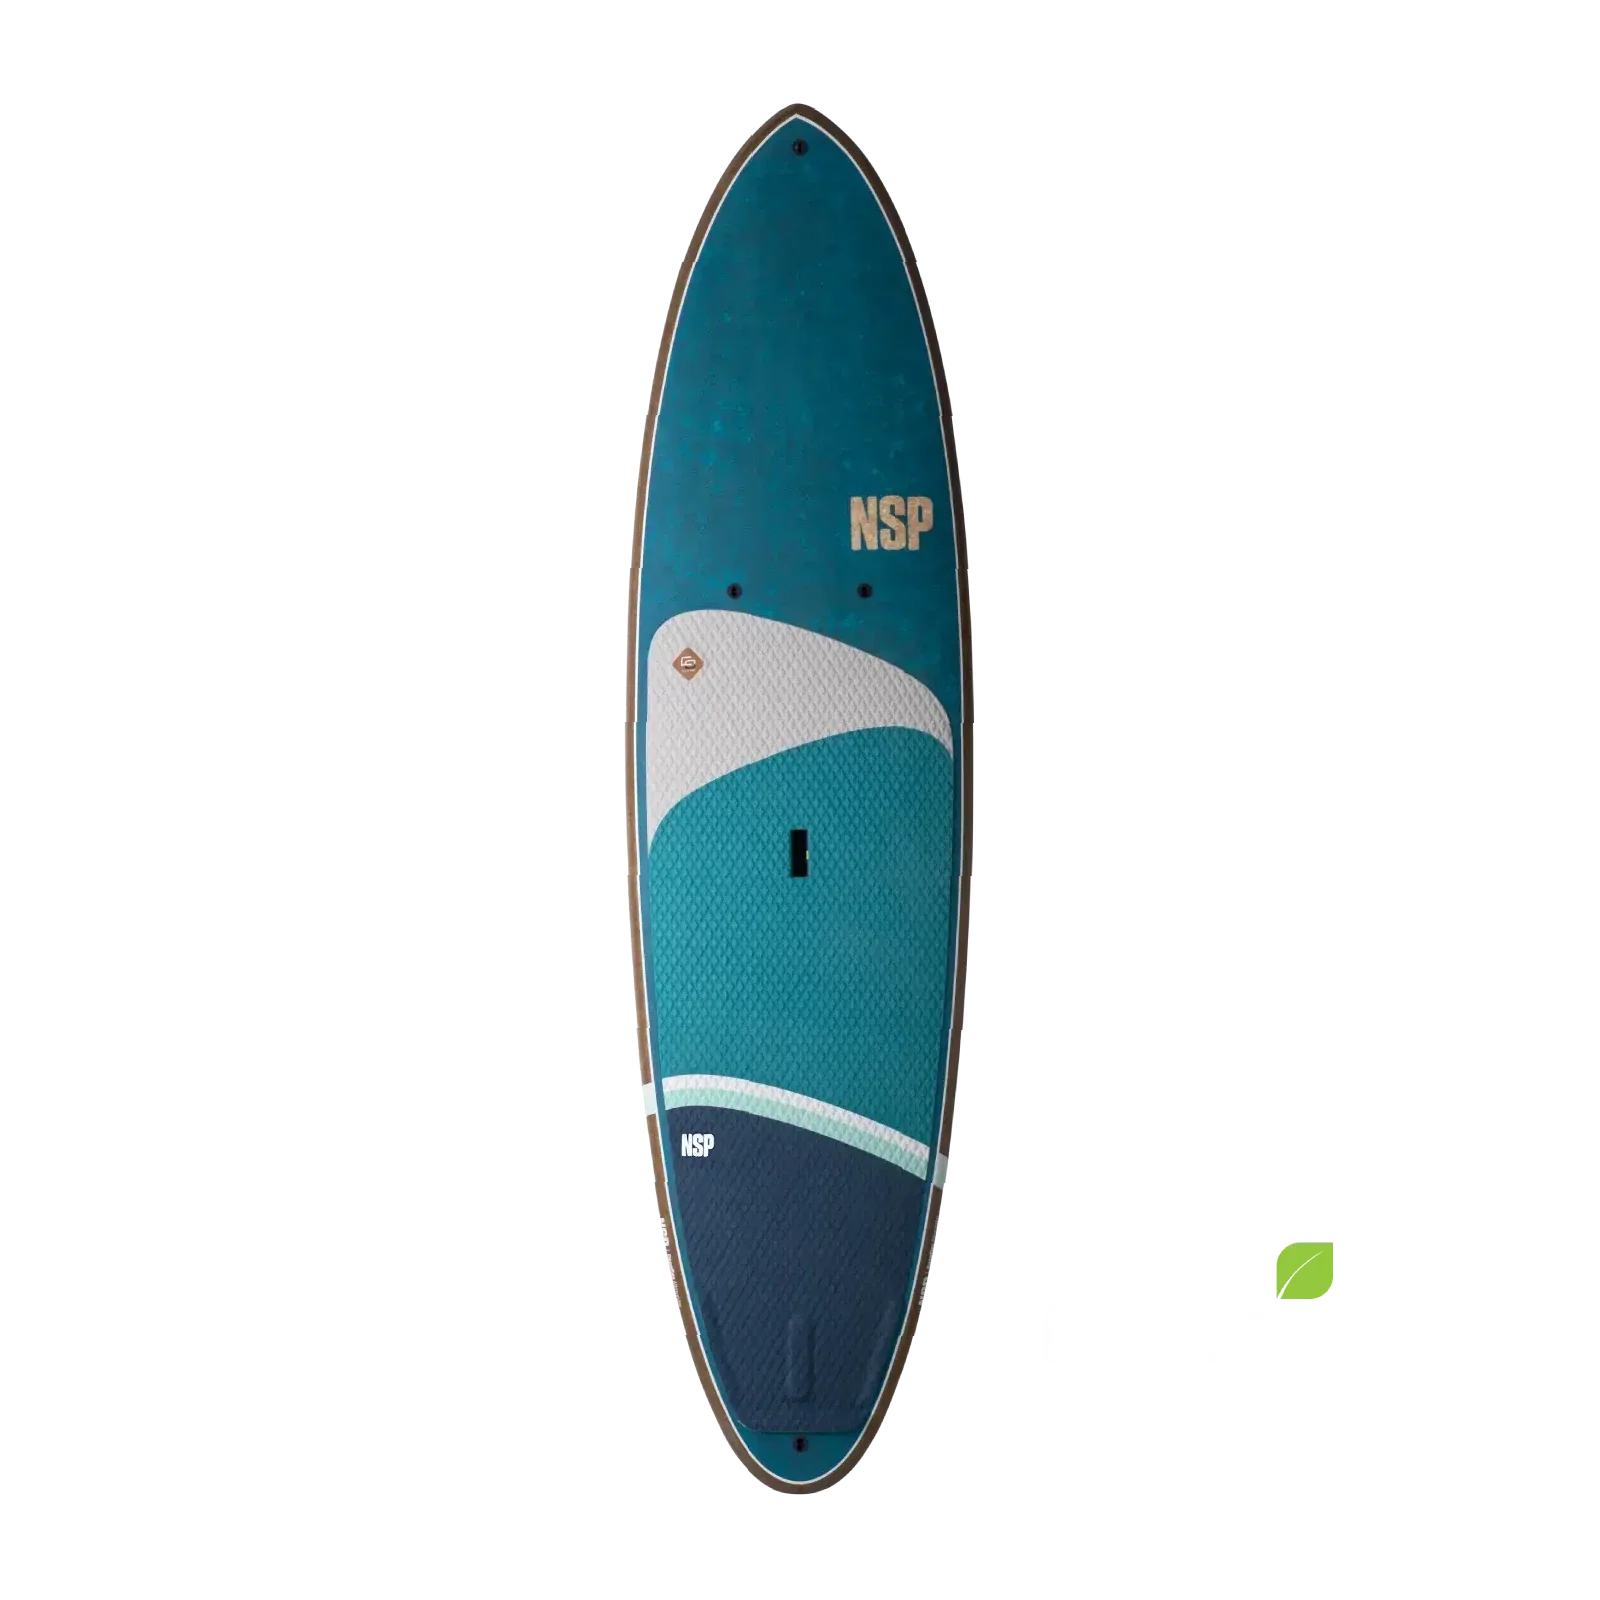 NSP Allrounder - Cocoflax - Classic 10'0